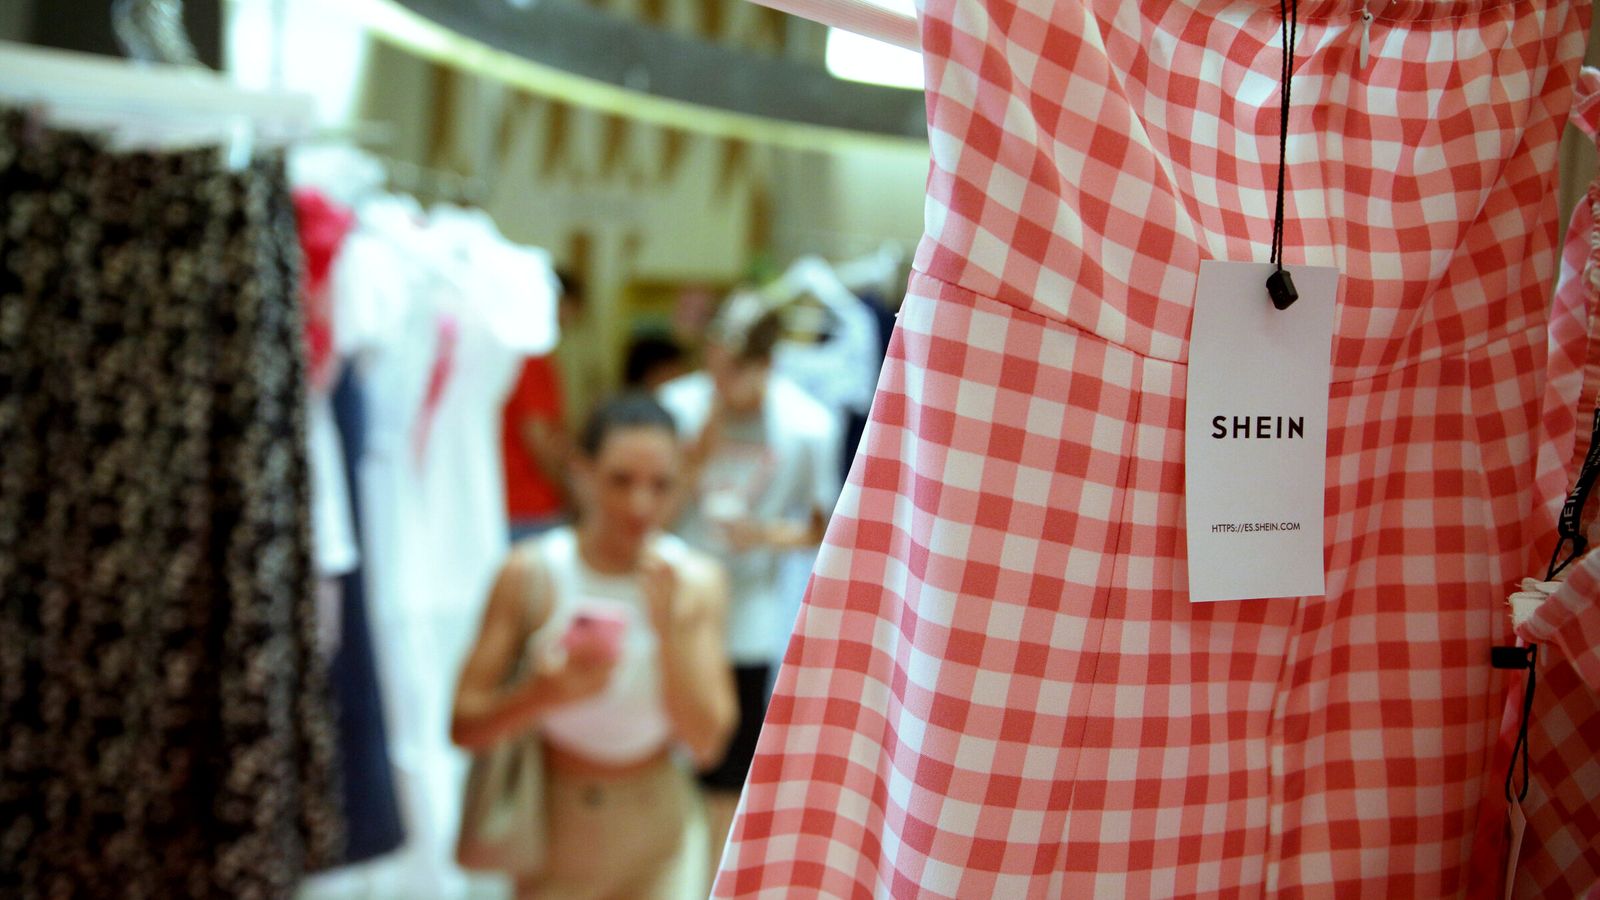 Shein holds talks with LSE to dangle prospect of London listing